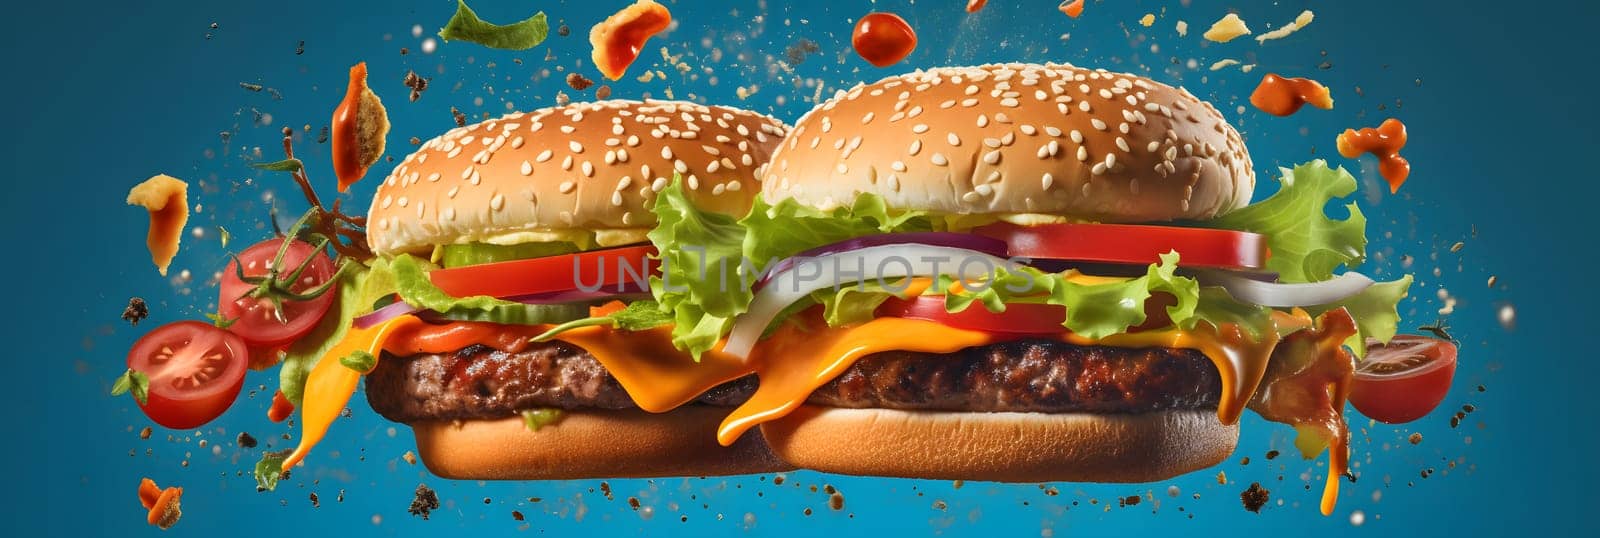 two hamburgers flying on blue background, neural network generated photorealistic image by z1b